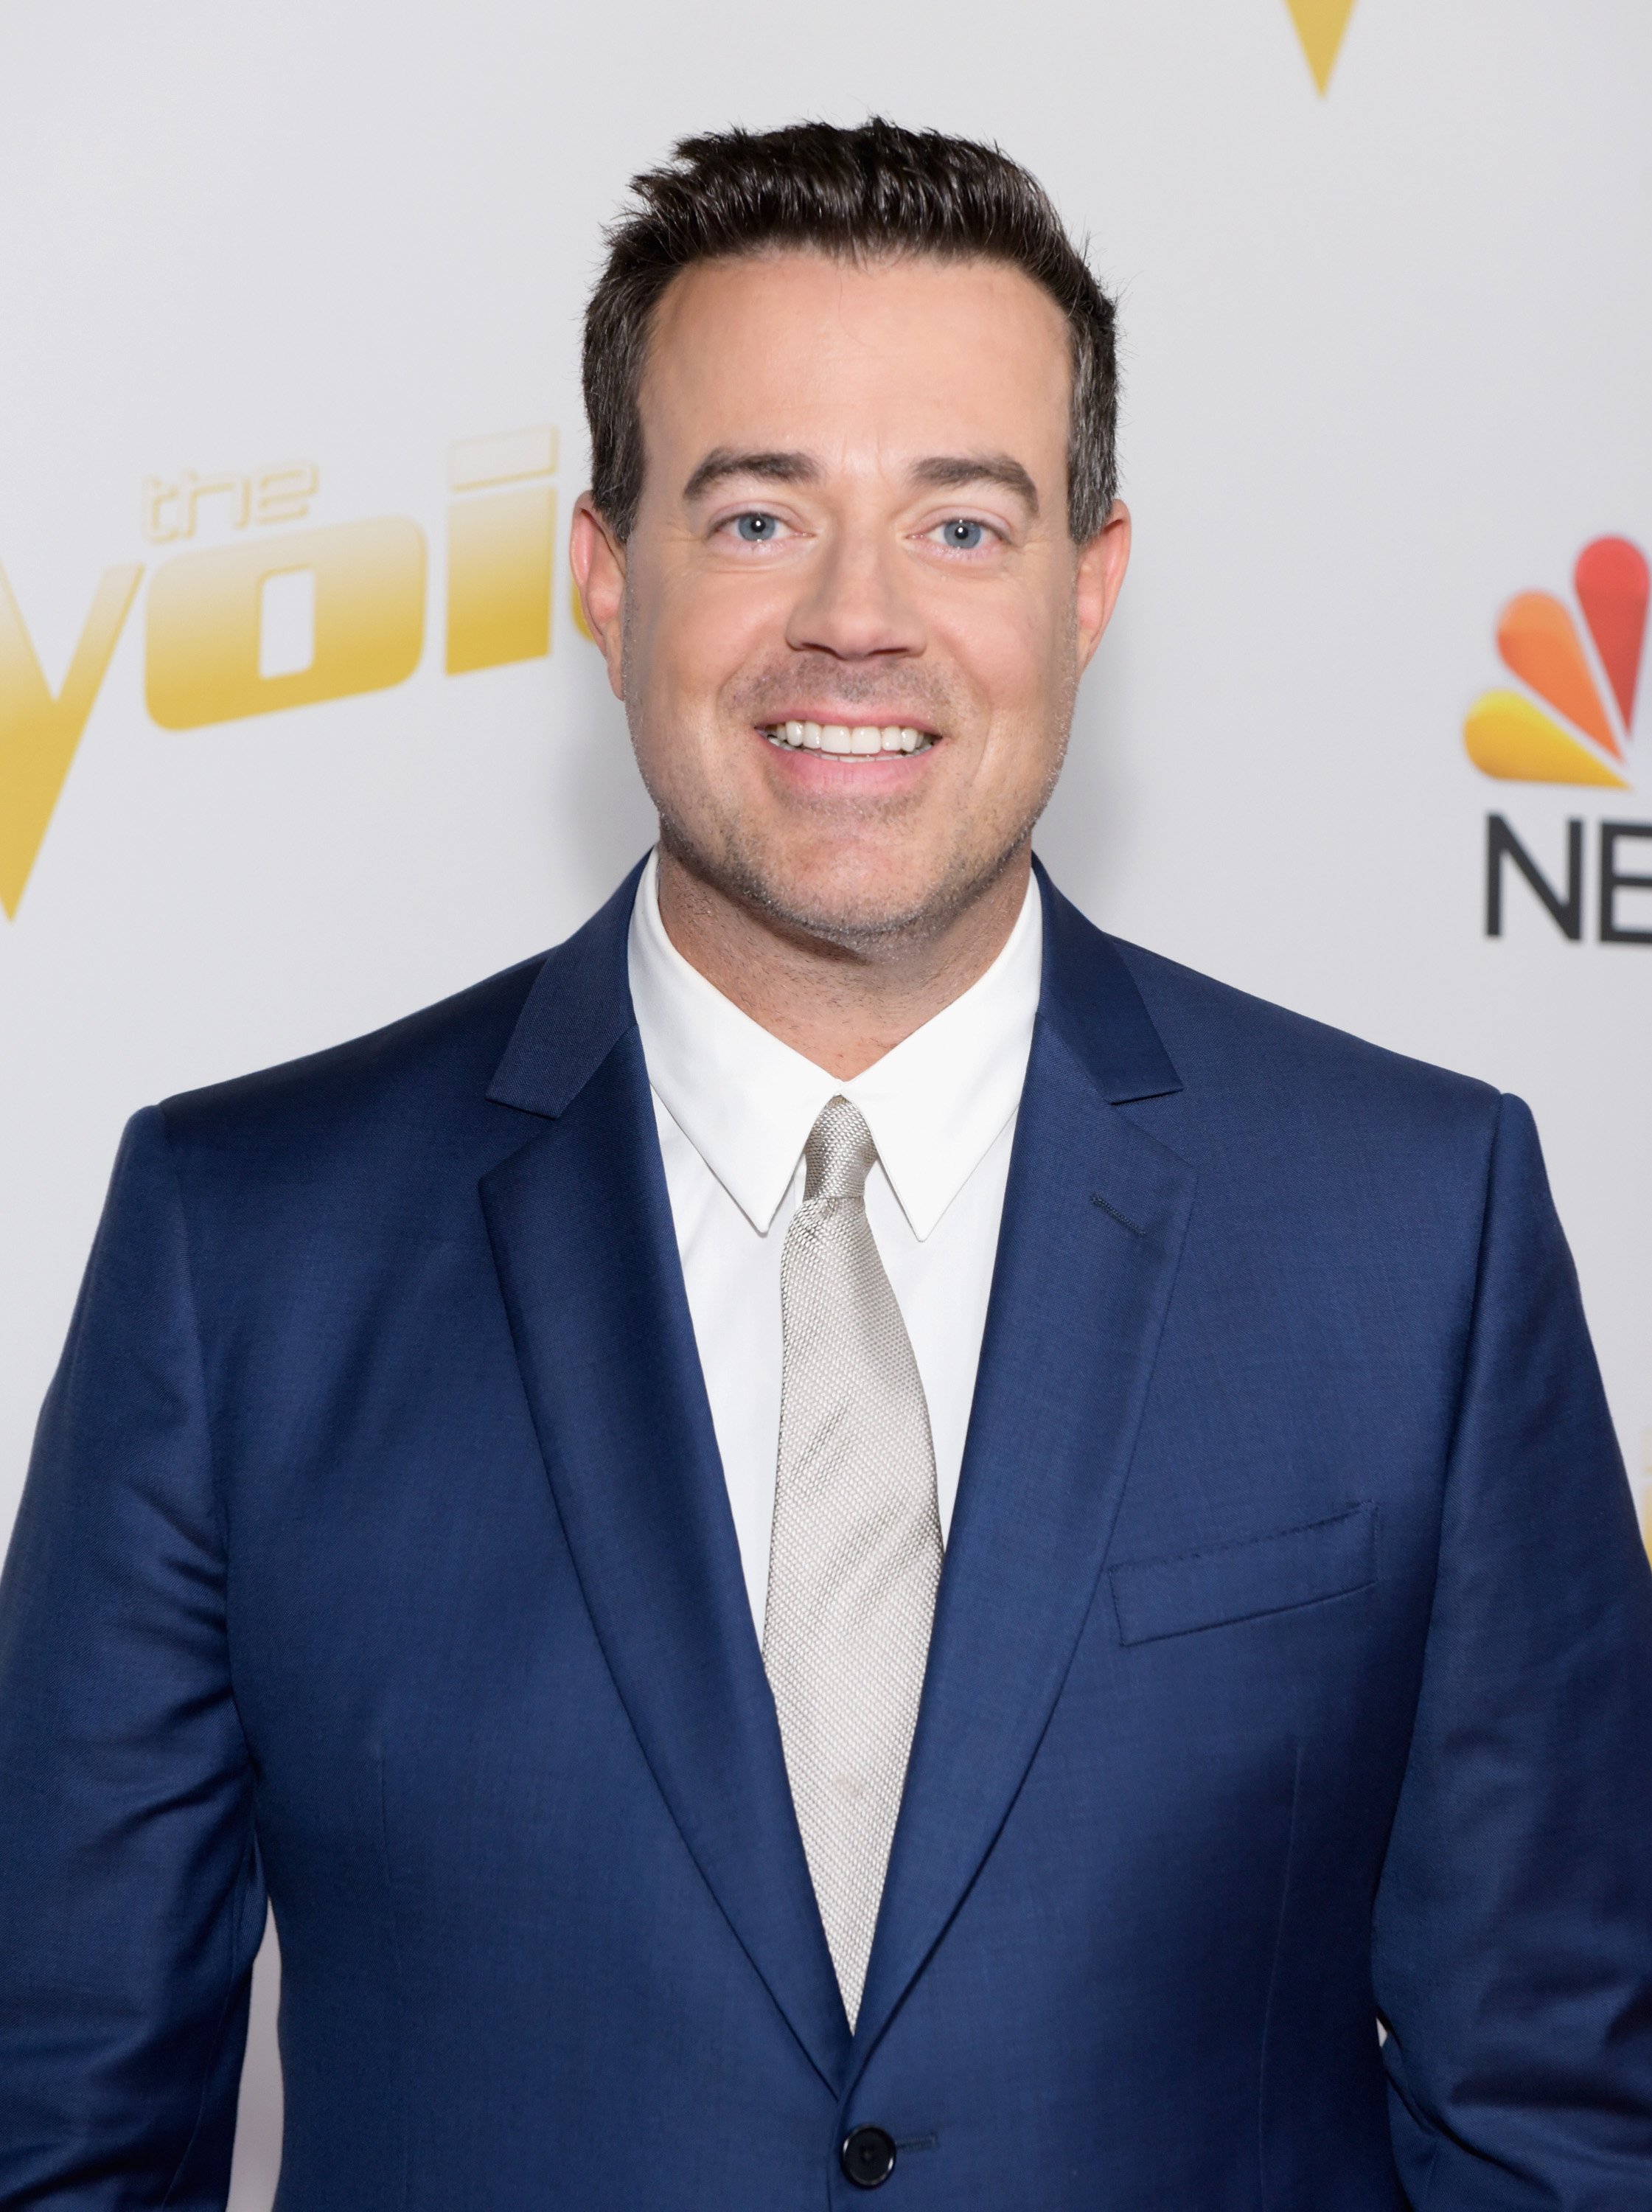 Carson Daly attends "The Voice" season 14 finale taping in Universal City, California on May 21, 2018 | Photo: Getty Images